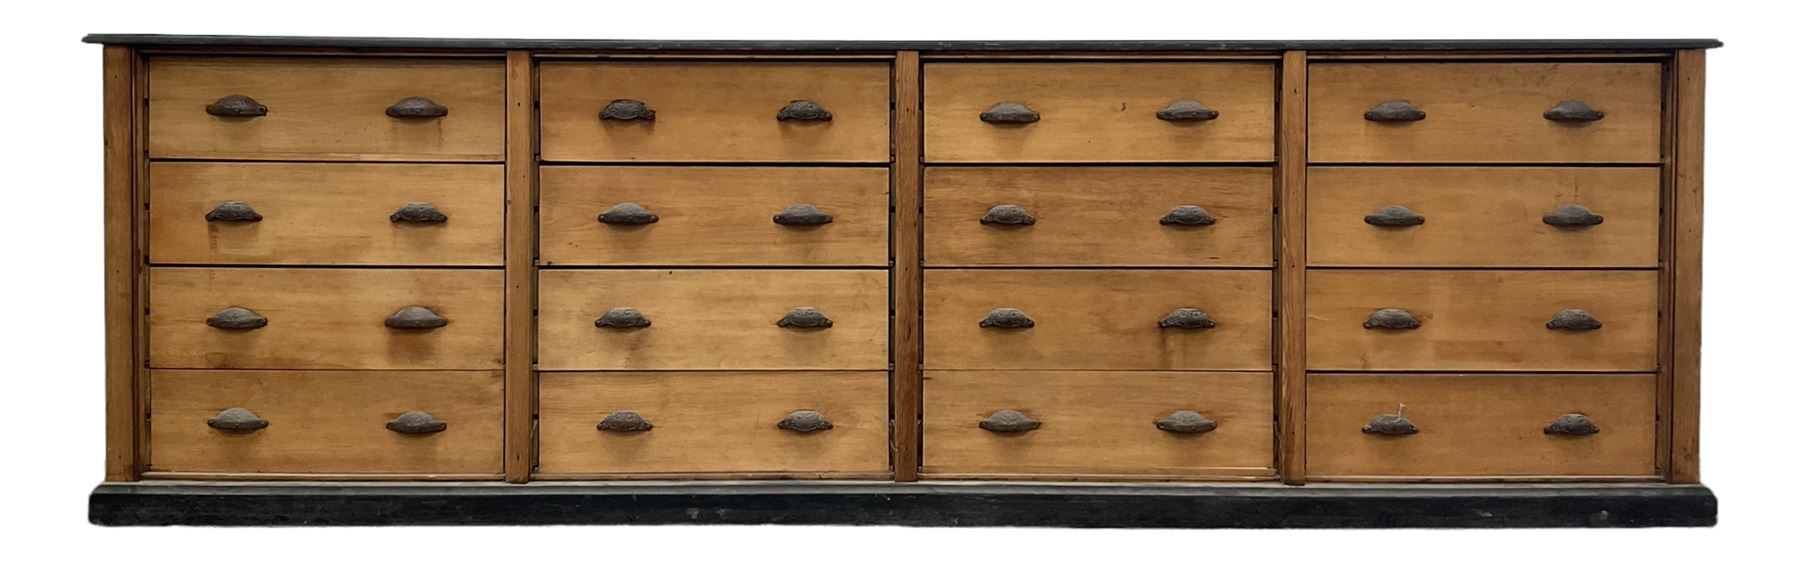 Early to mid-20th century pine multi-drawer unit